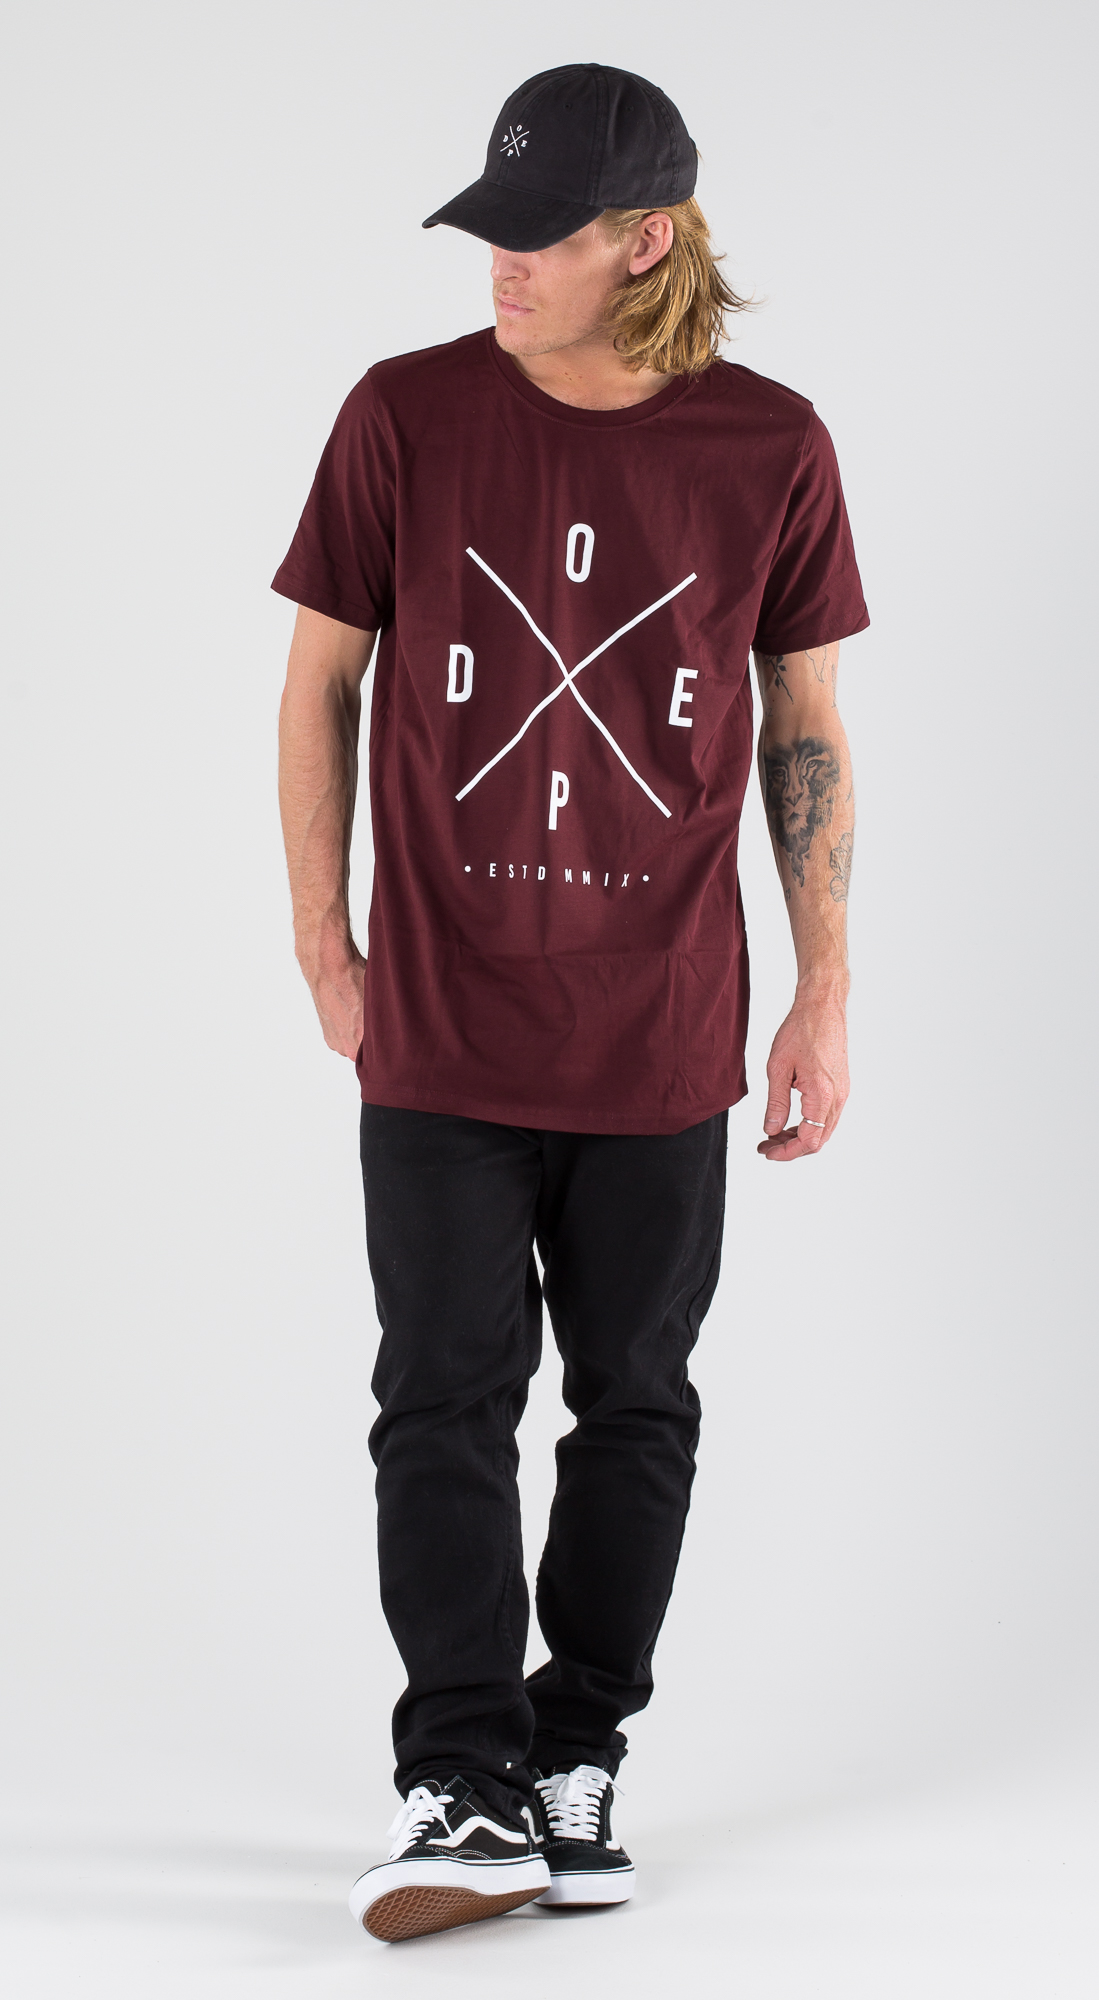 burgundy t shirt outfit